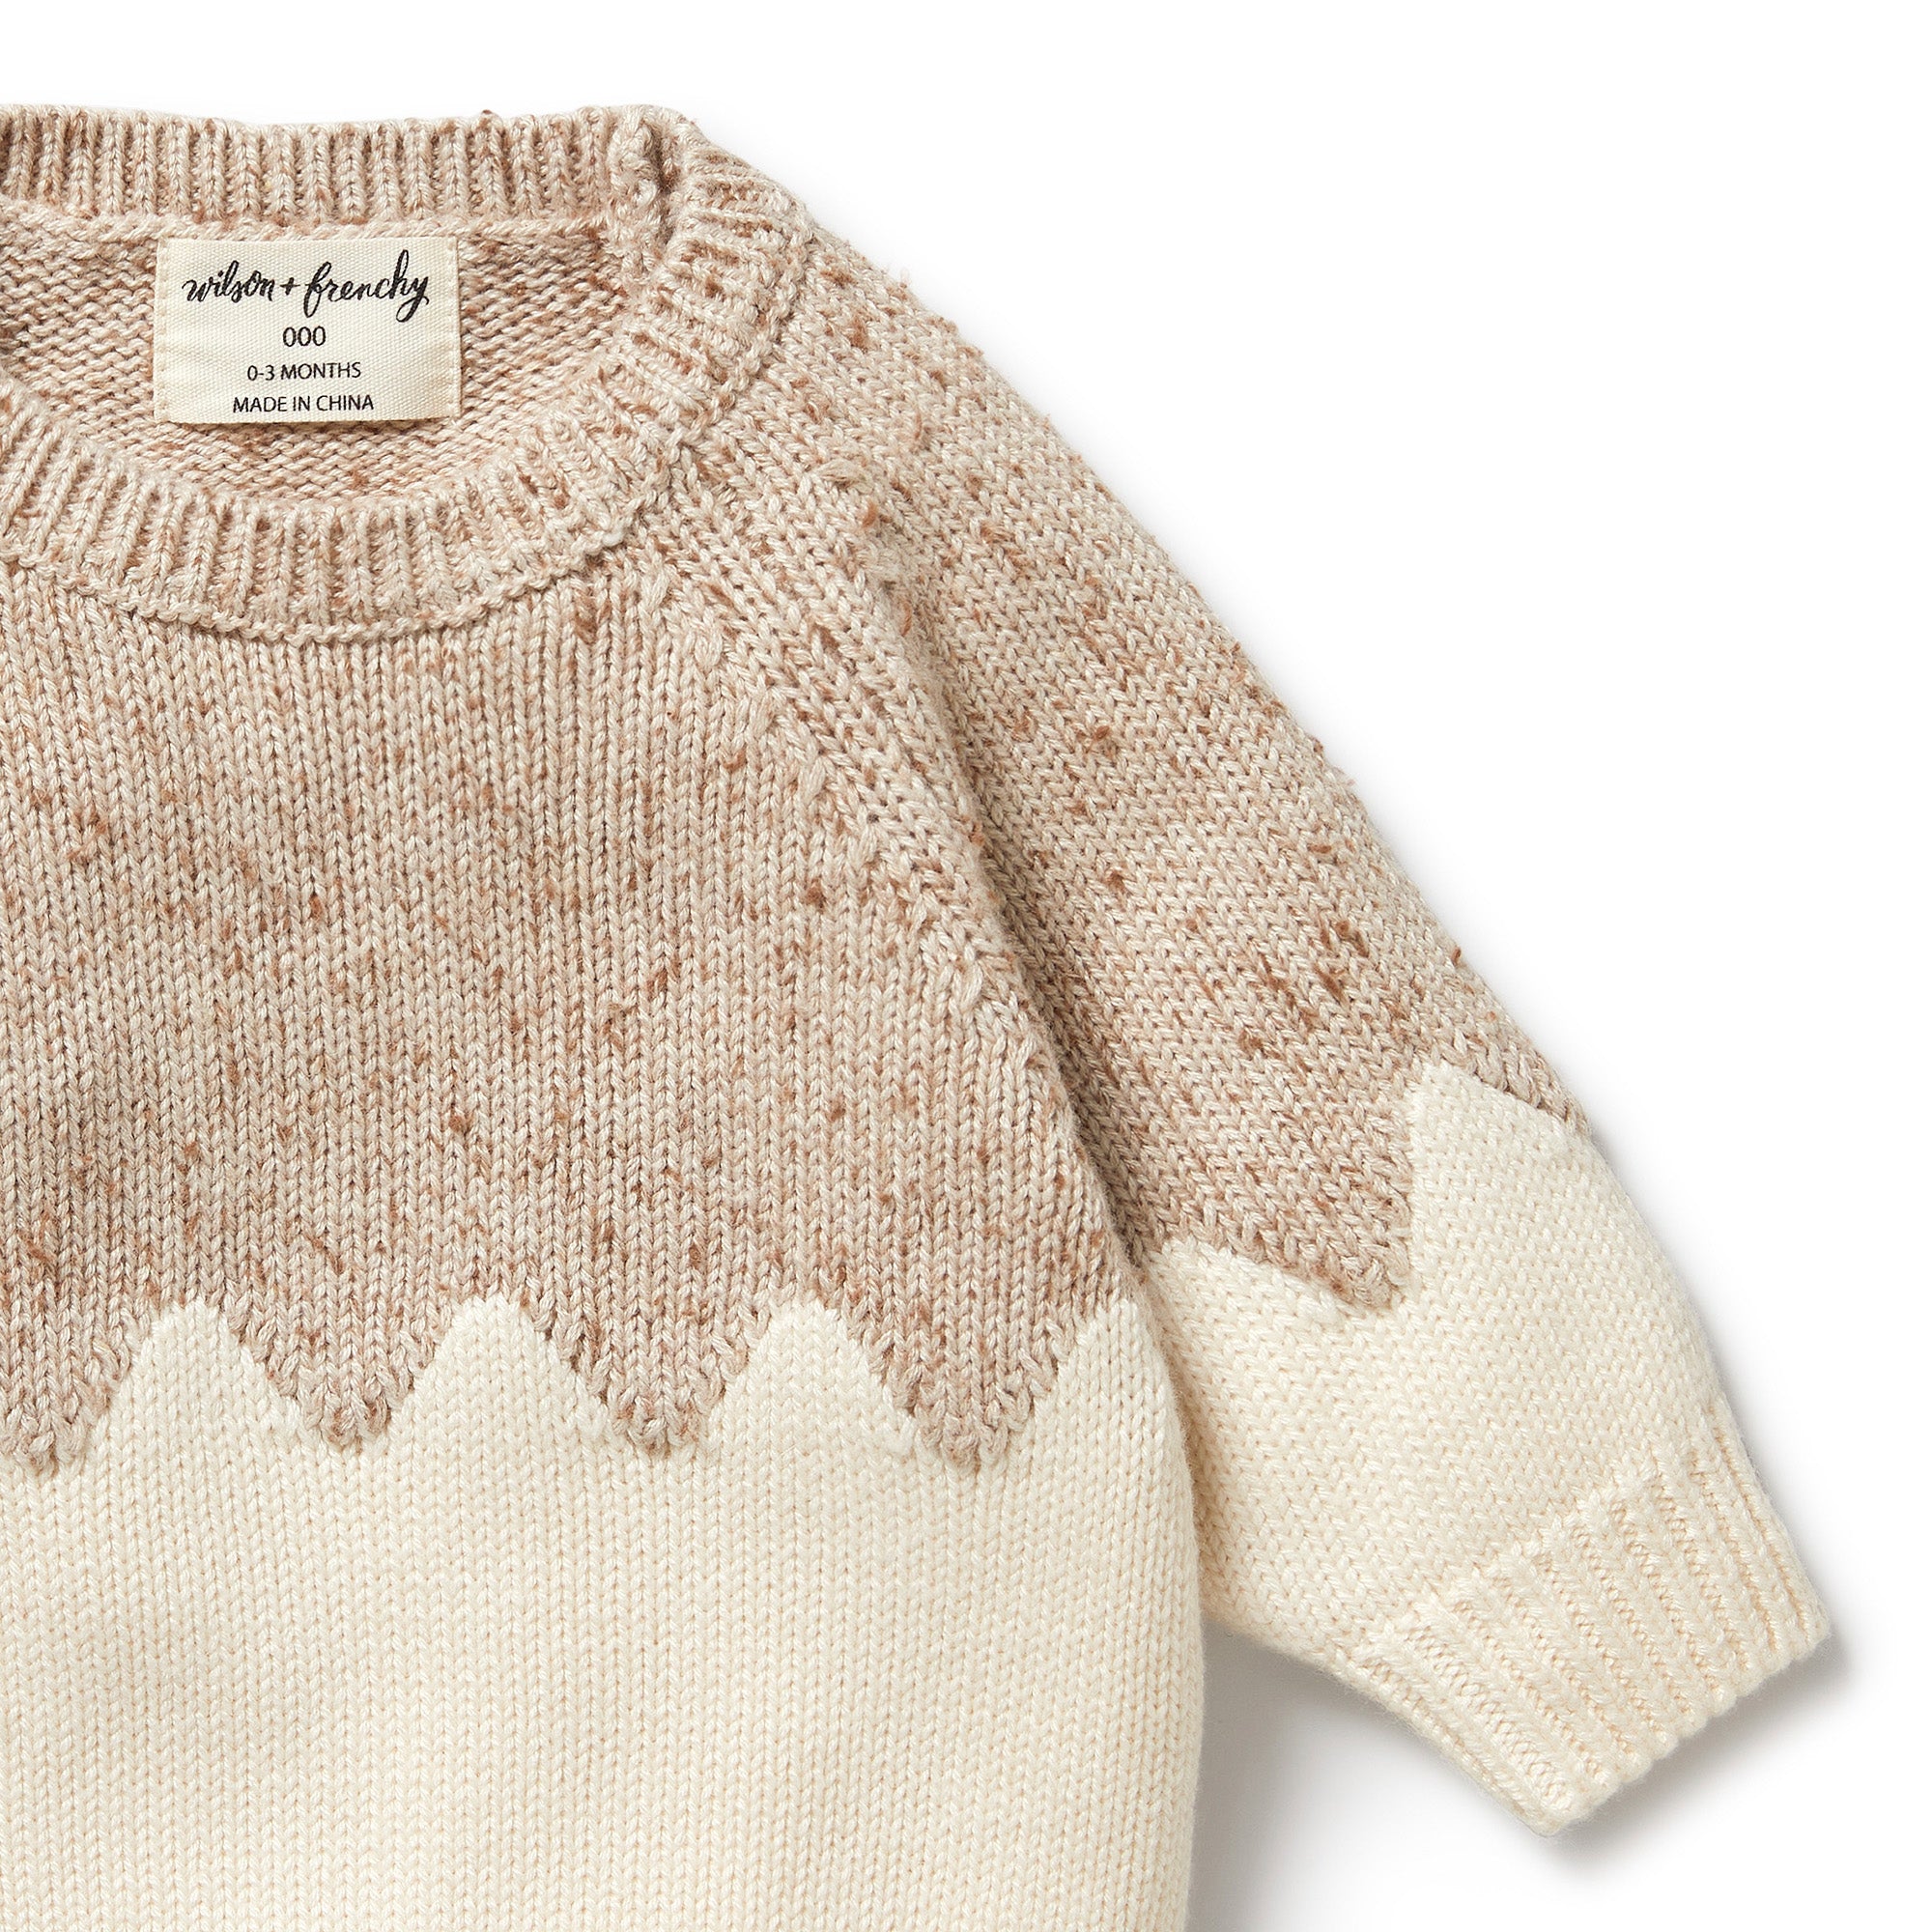 WILSON & FRENCHY - Almond Fleck Knitted Jacquard Jumper